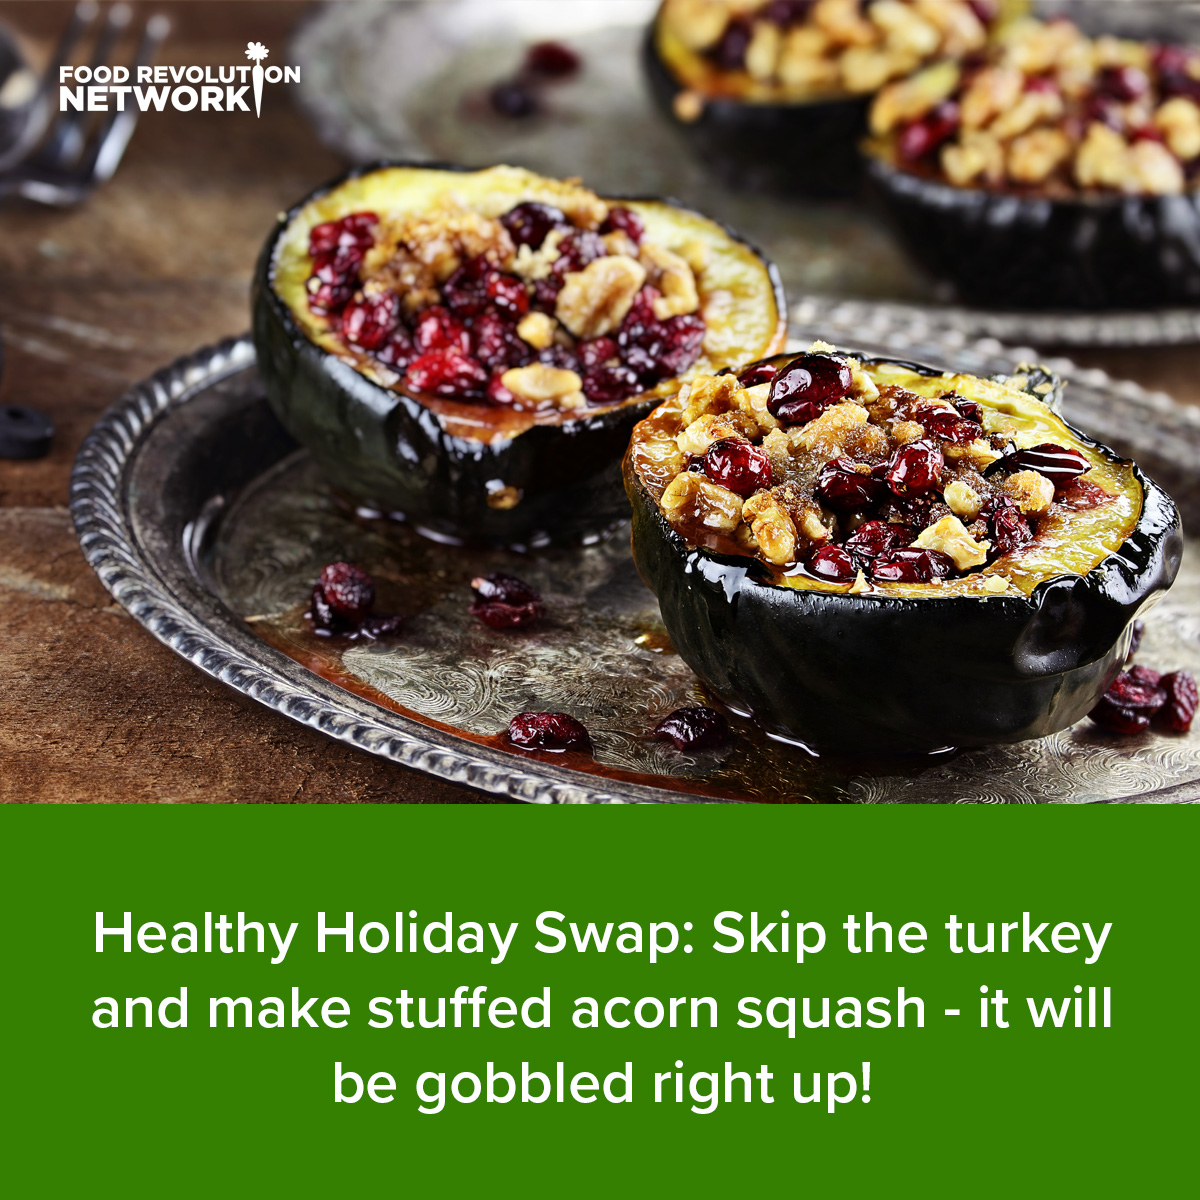 Healthy Holiday Swap: Skip the turkey and make stuffed acorn squash - it will be gobbled right up!